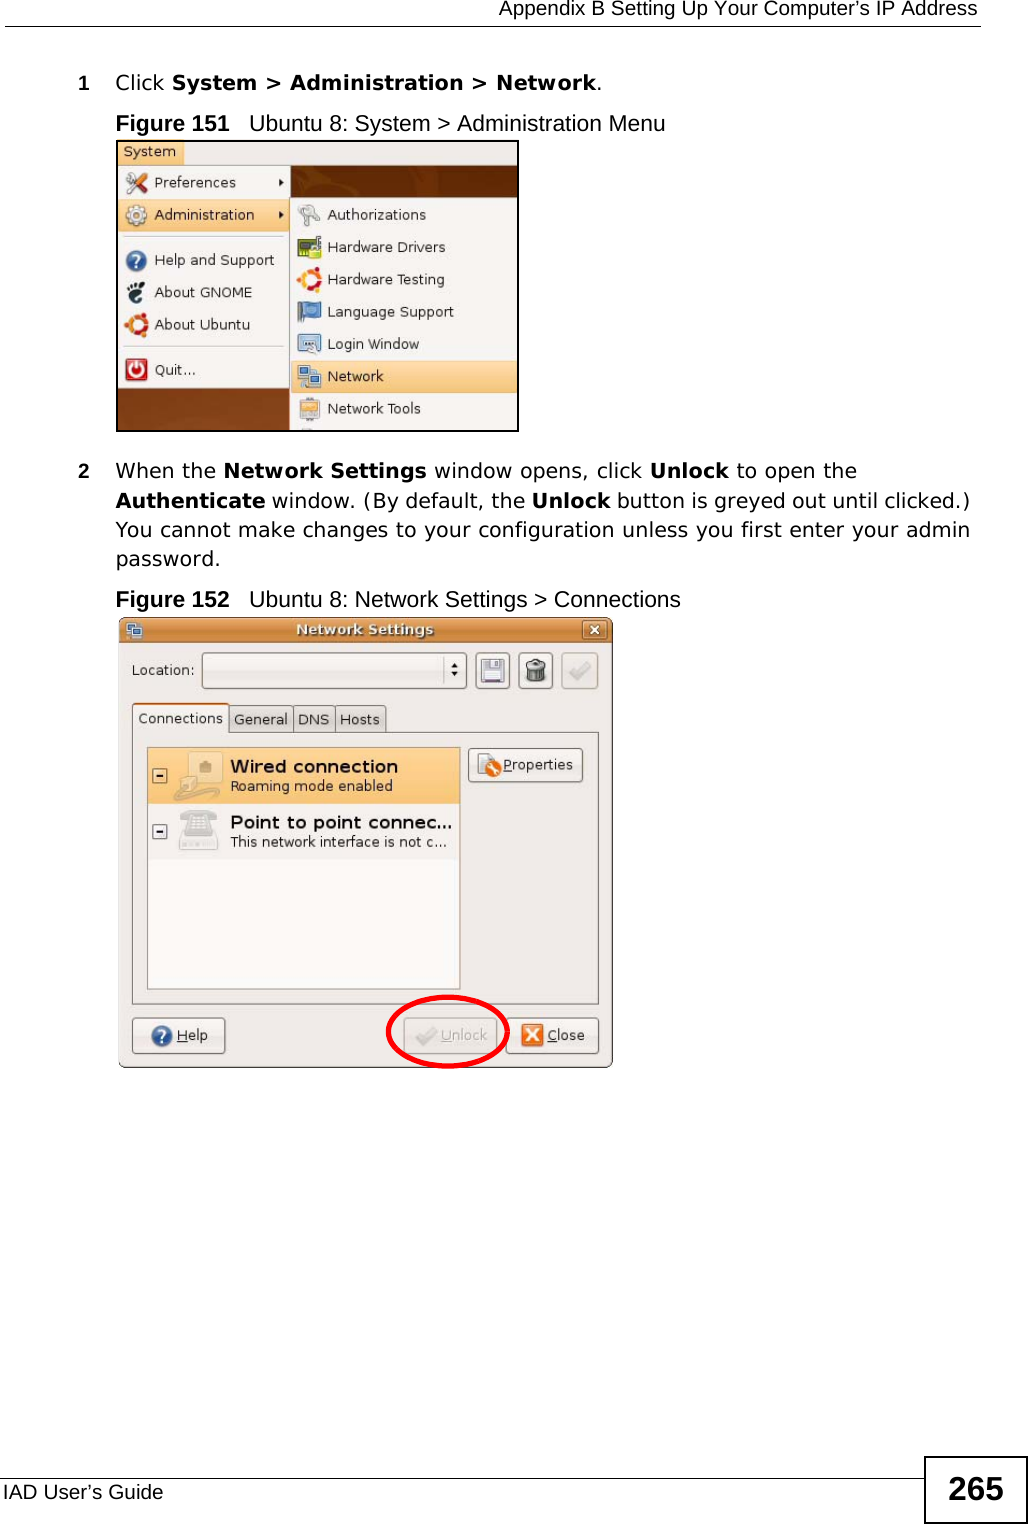  Appendix B Setting Up Your Computer’s IP AddressIAD User’s Guide 2651Click System &gt; Administration &gt; Network.Figure 151   Ubuntu 8: System &gt; Administration Menu2When the Network Settings window opens, click Unlock to open the Authenticate window. (By default, the Unlock button is greyed out until clicked.) You cannot make changes to your configuration unless you first enter your admin password.Figure 152   Ubuntu 8: Network Settings &gt; Connections